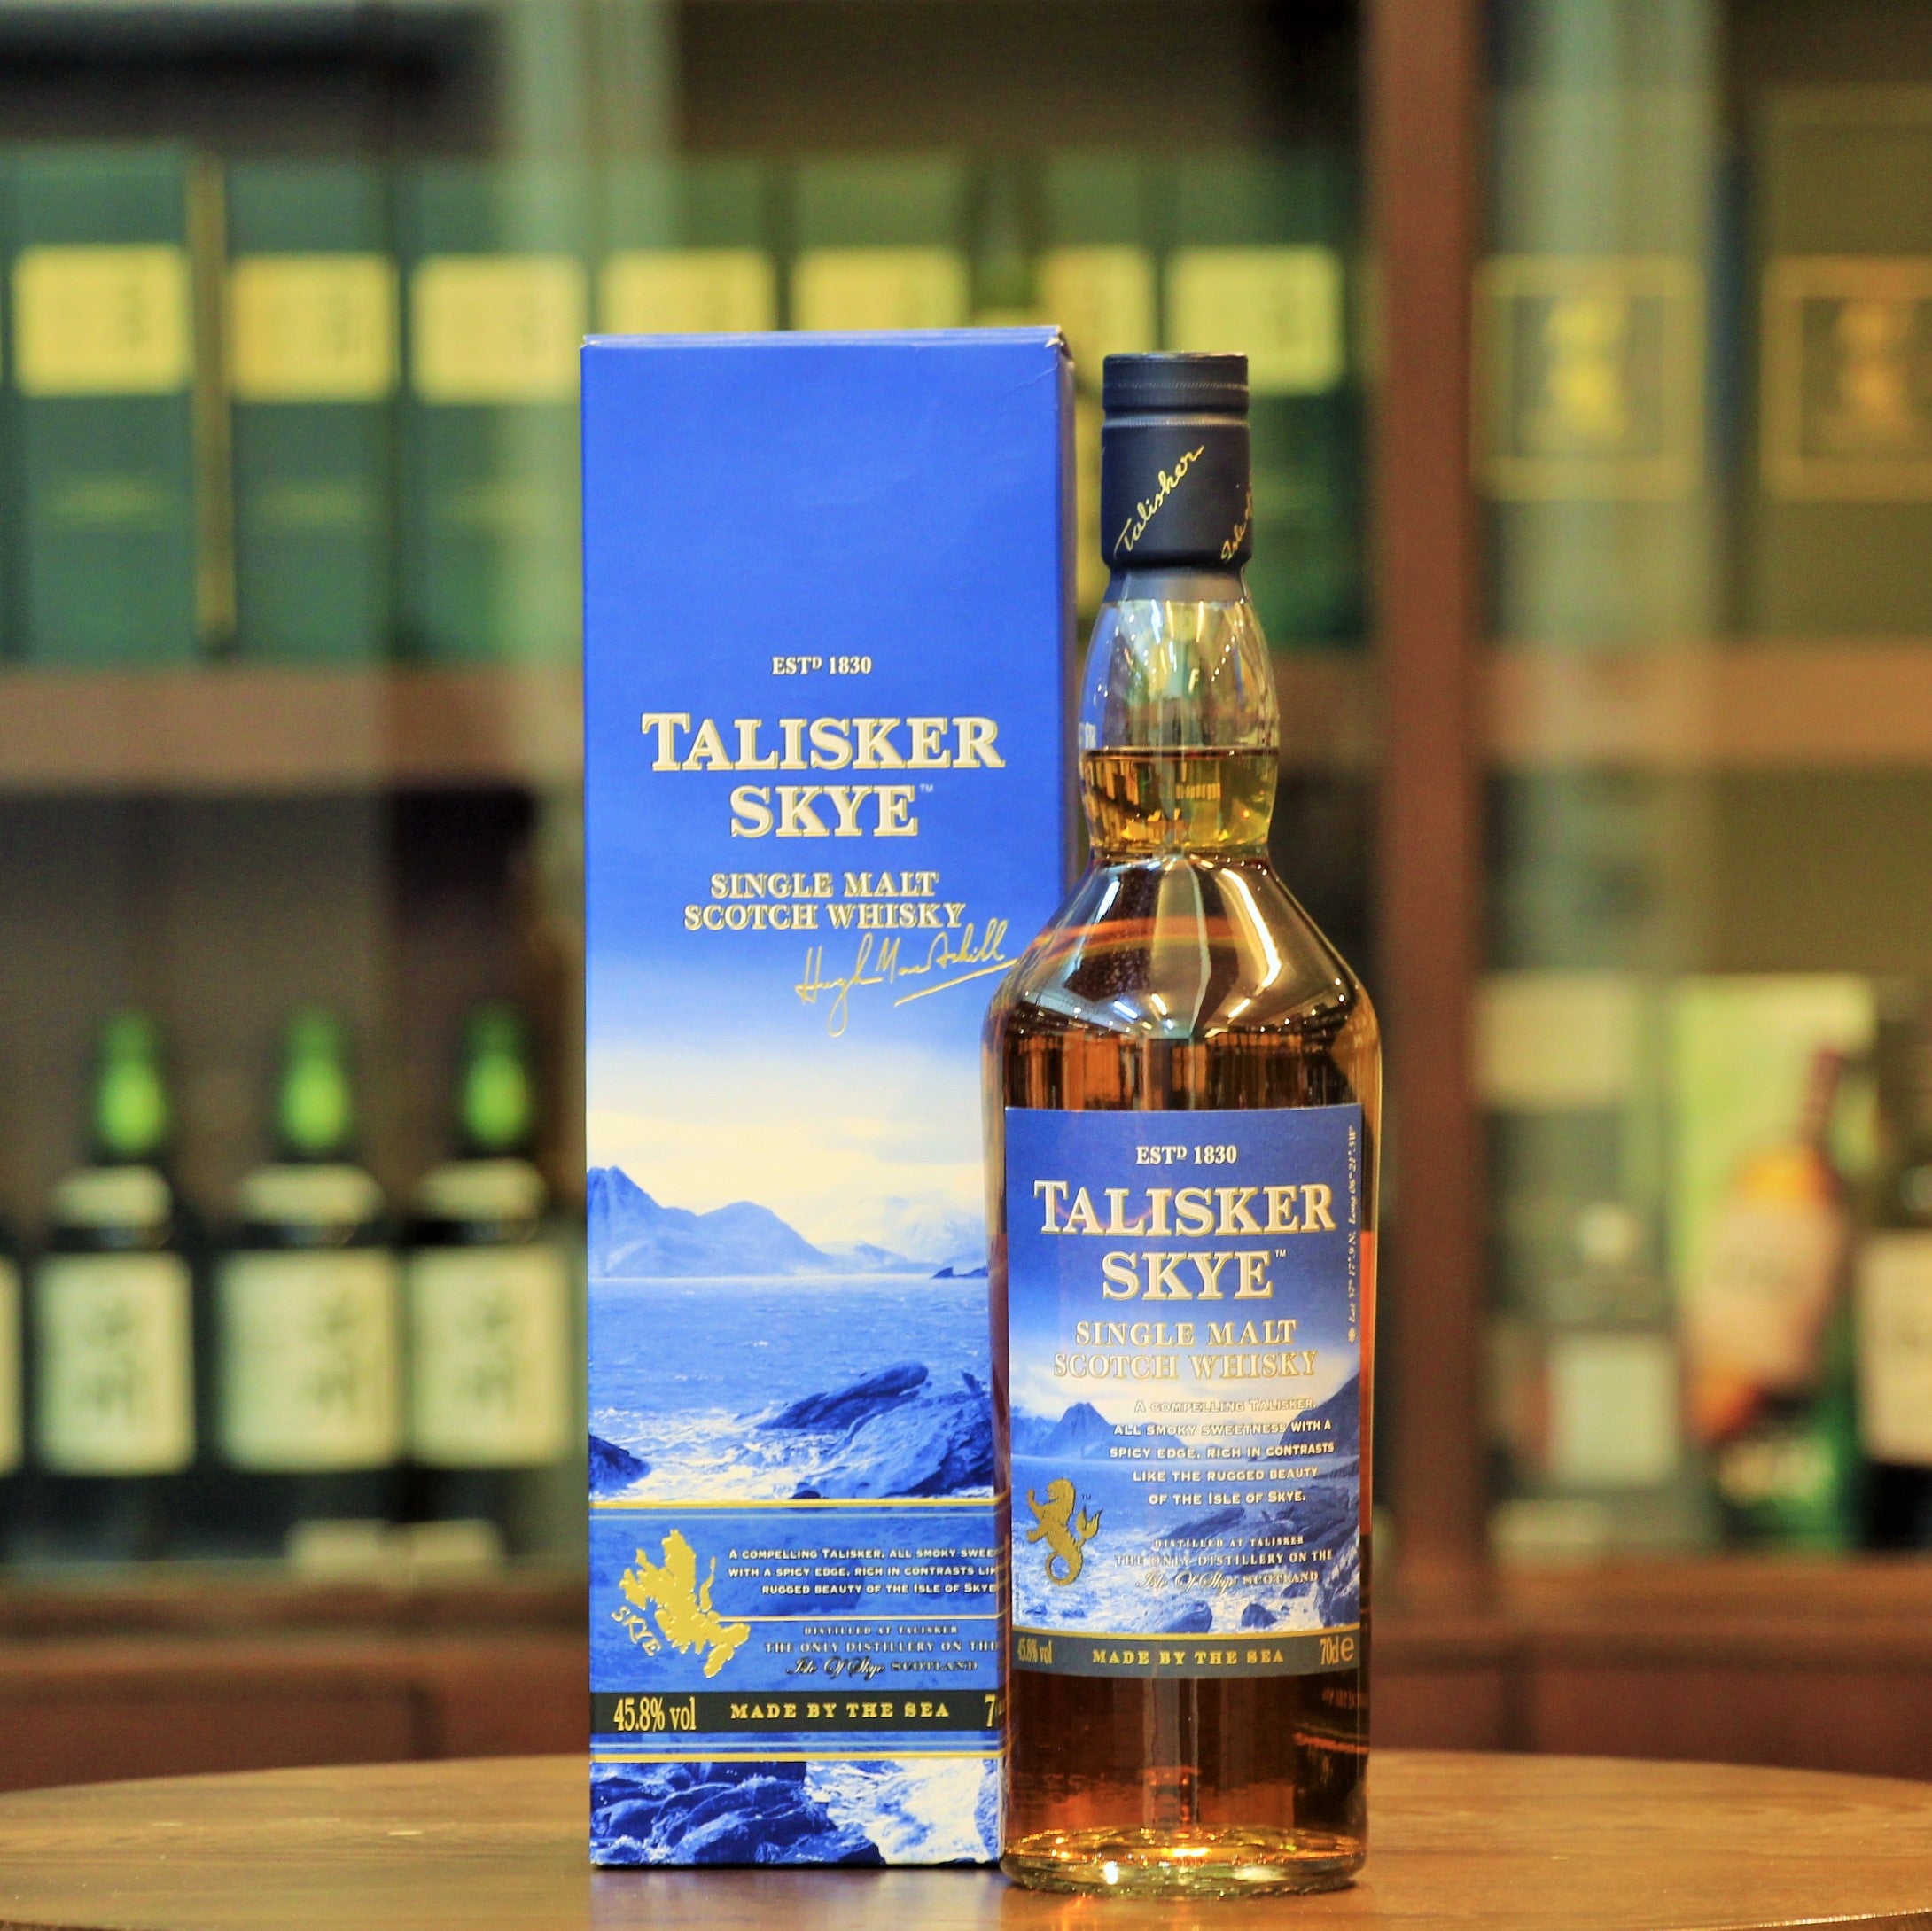 Introduced in early 2015, this release is named after the island on which the distillery us located. A more rounded Single Malt it is reportedly matured in a variety of casks with a larger proportion of toasted American Oak casks giving it a sweet flavour profile packed with fresh citrus and sweet smoke making it a very approachable Whisky, yet with the traditional character of the distillery. 